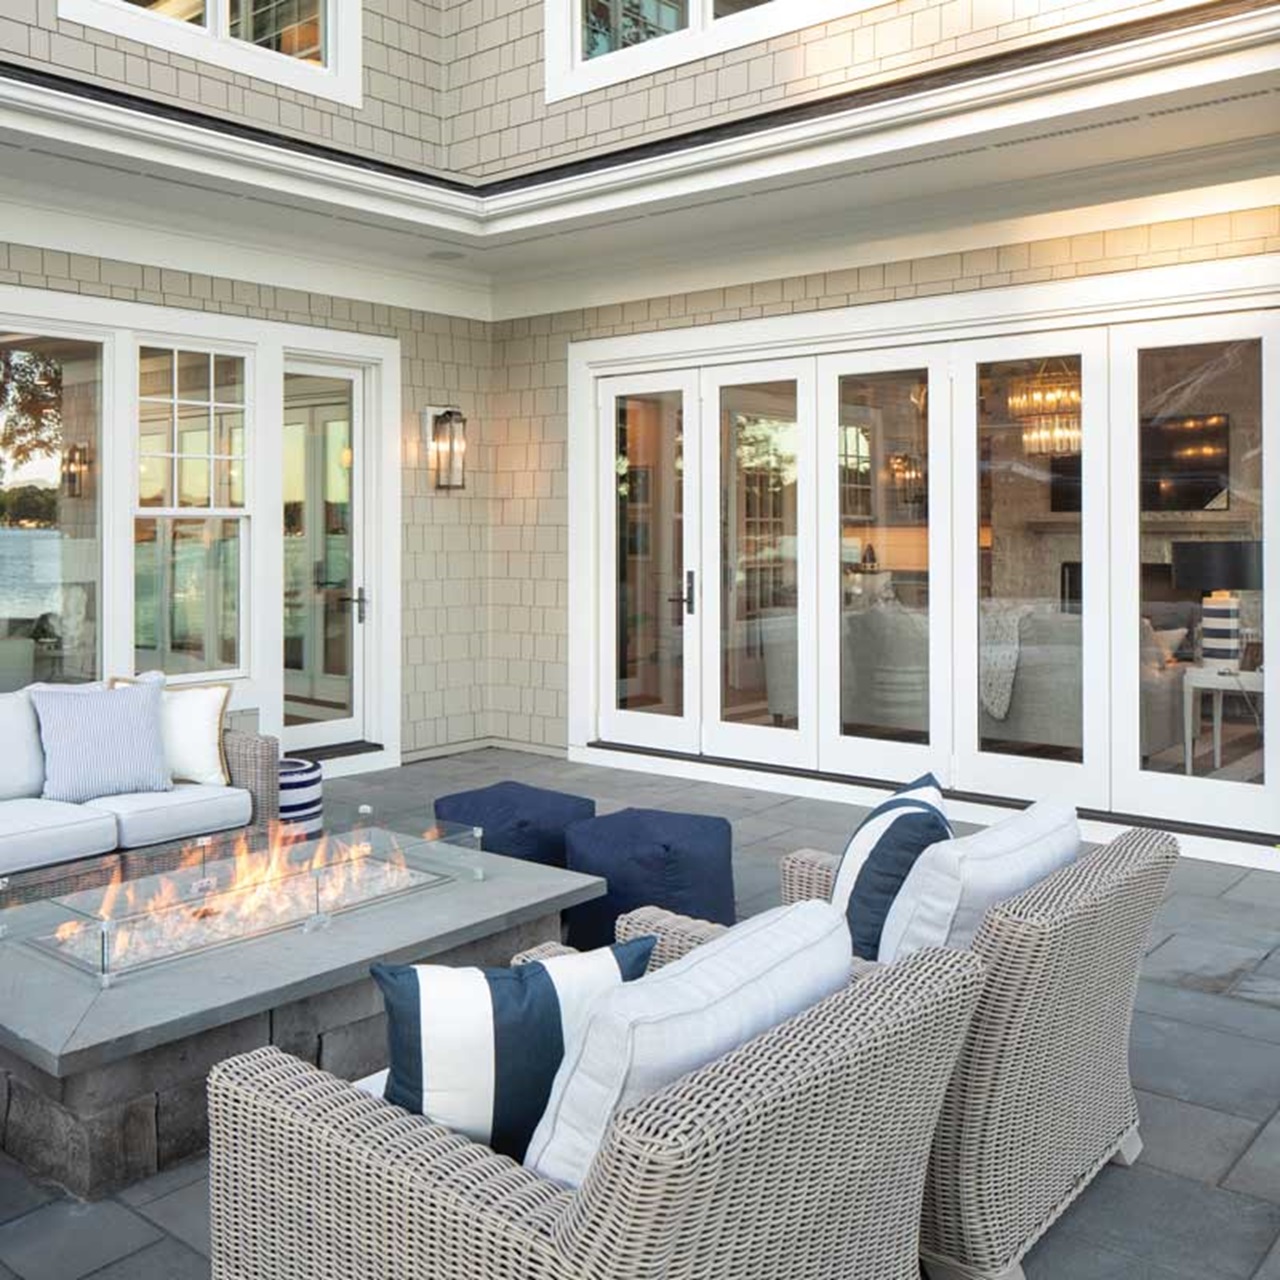 Outdoor patio with seating in front of white marvin elevate windows and patio door